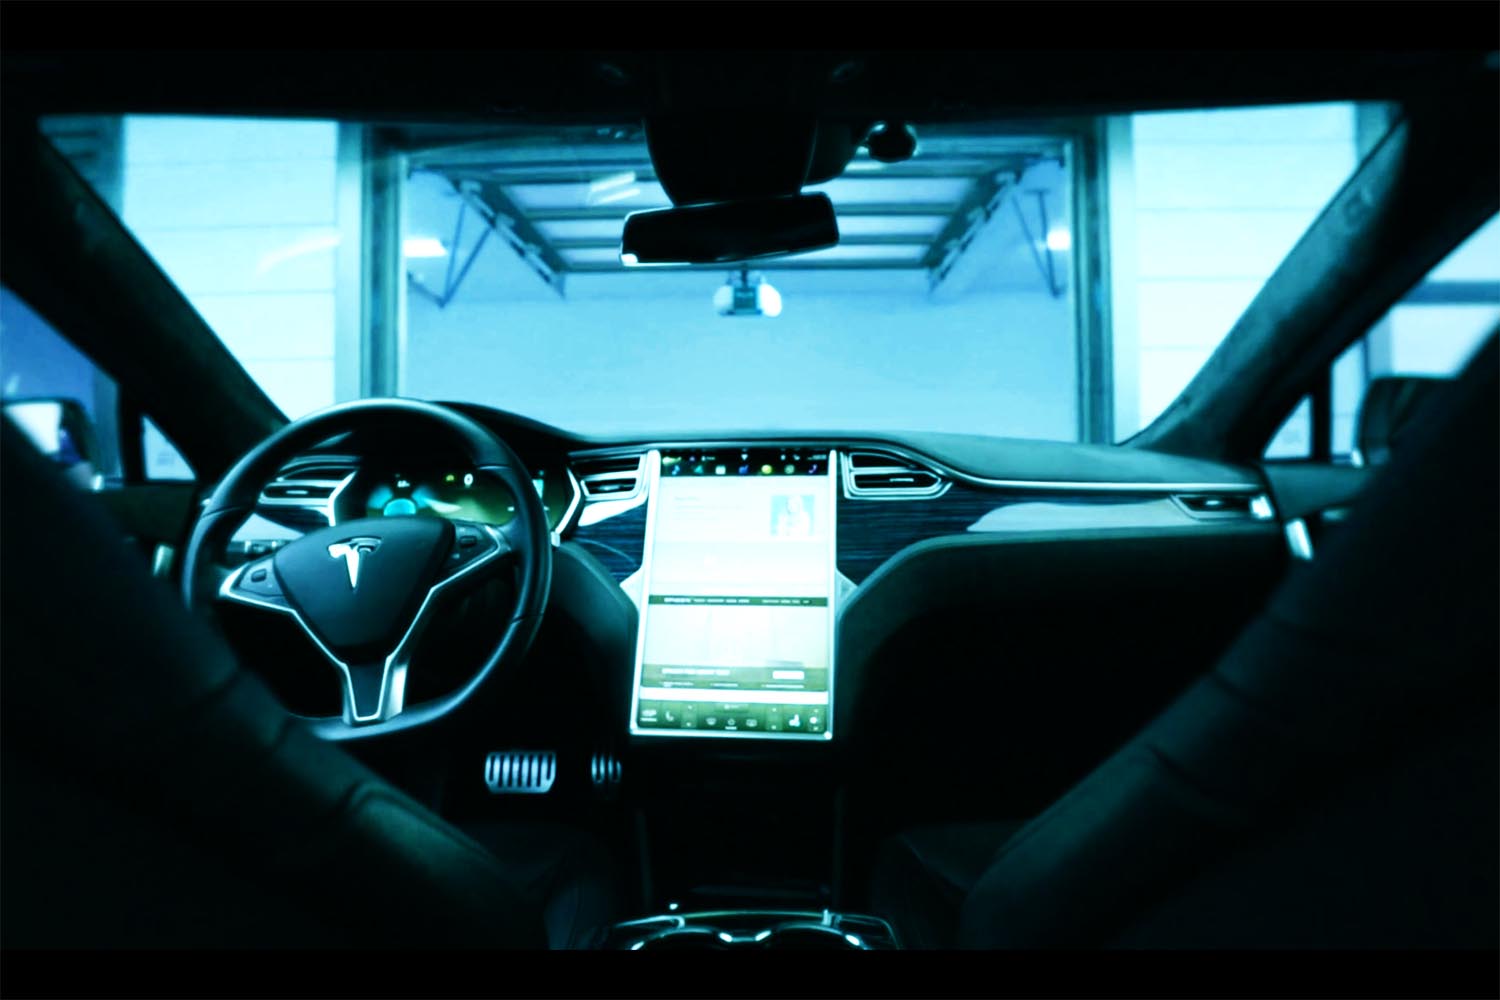 THE SELF-DRIVING TESLA IS THE PERFECT GETAWAY CAR